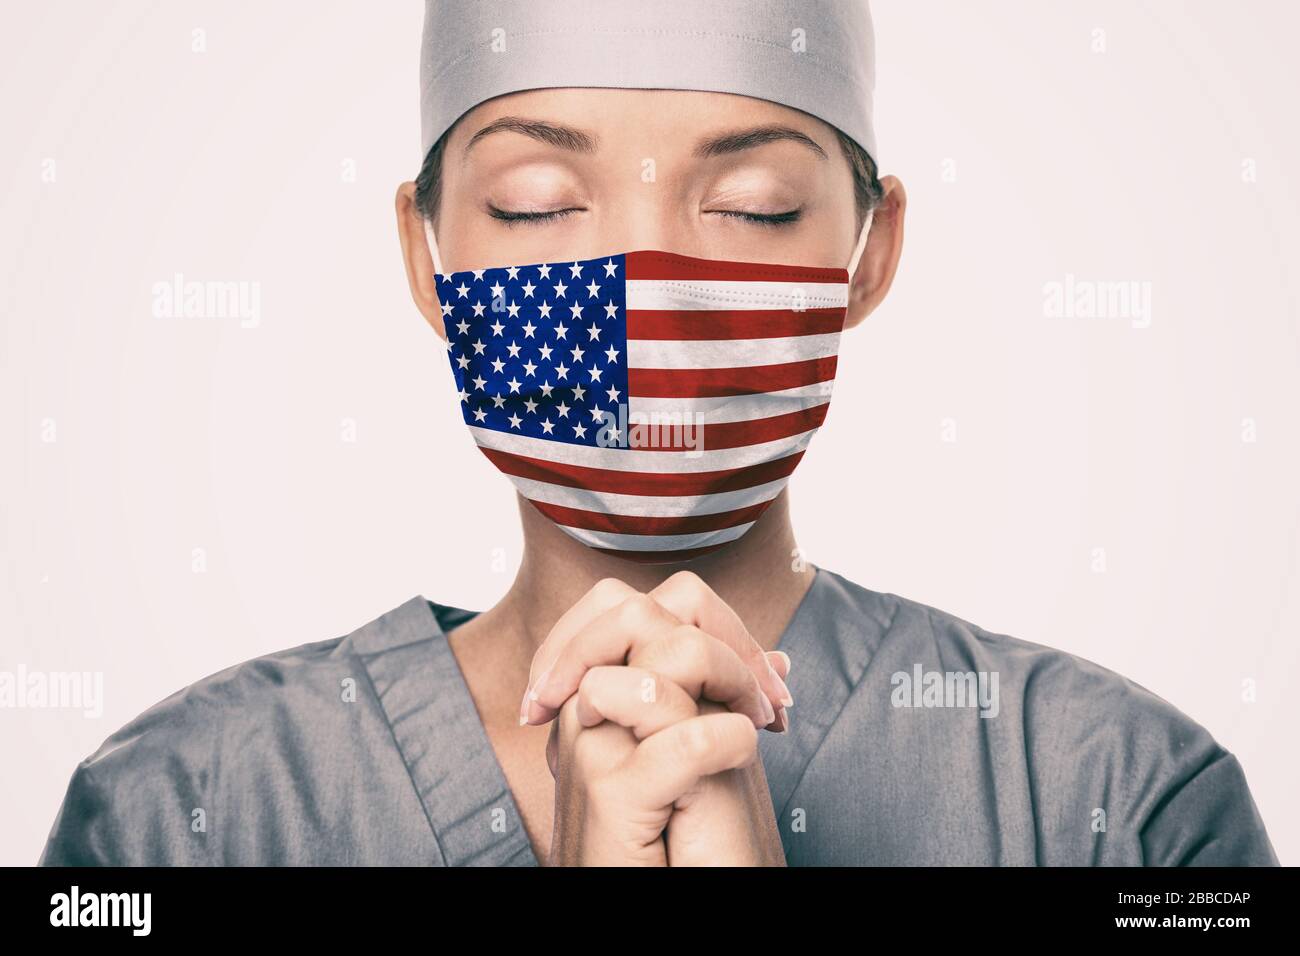 Coronavirus pandemic in the United States of America. USA american flag print on doctor's mask praying with claspeds hands in hope for help. Crying for help, disaster aid needed in the US. Stock Photo